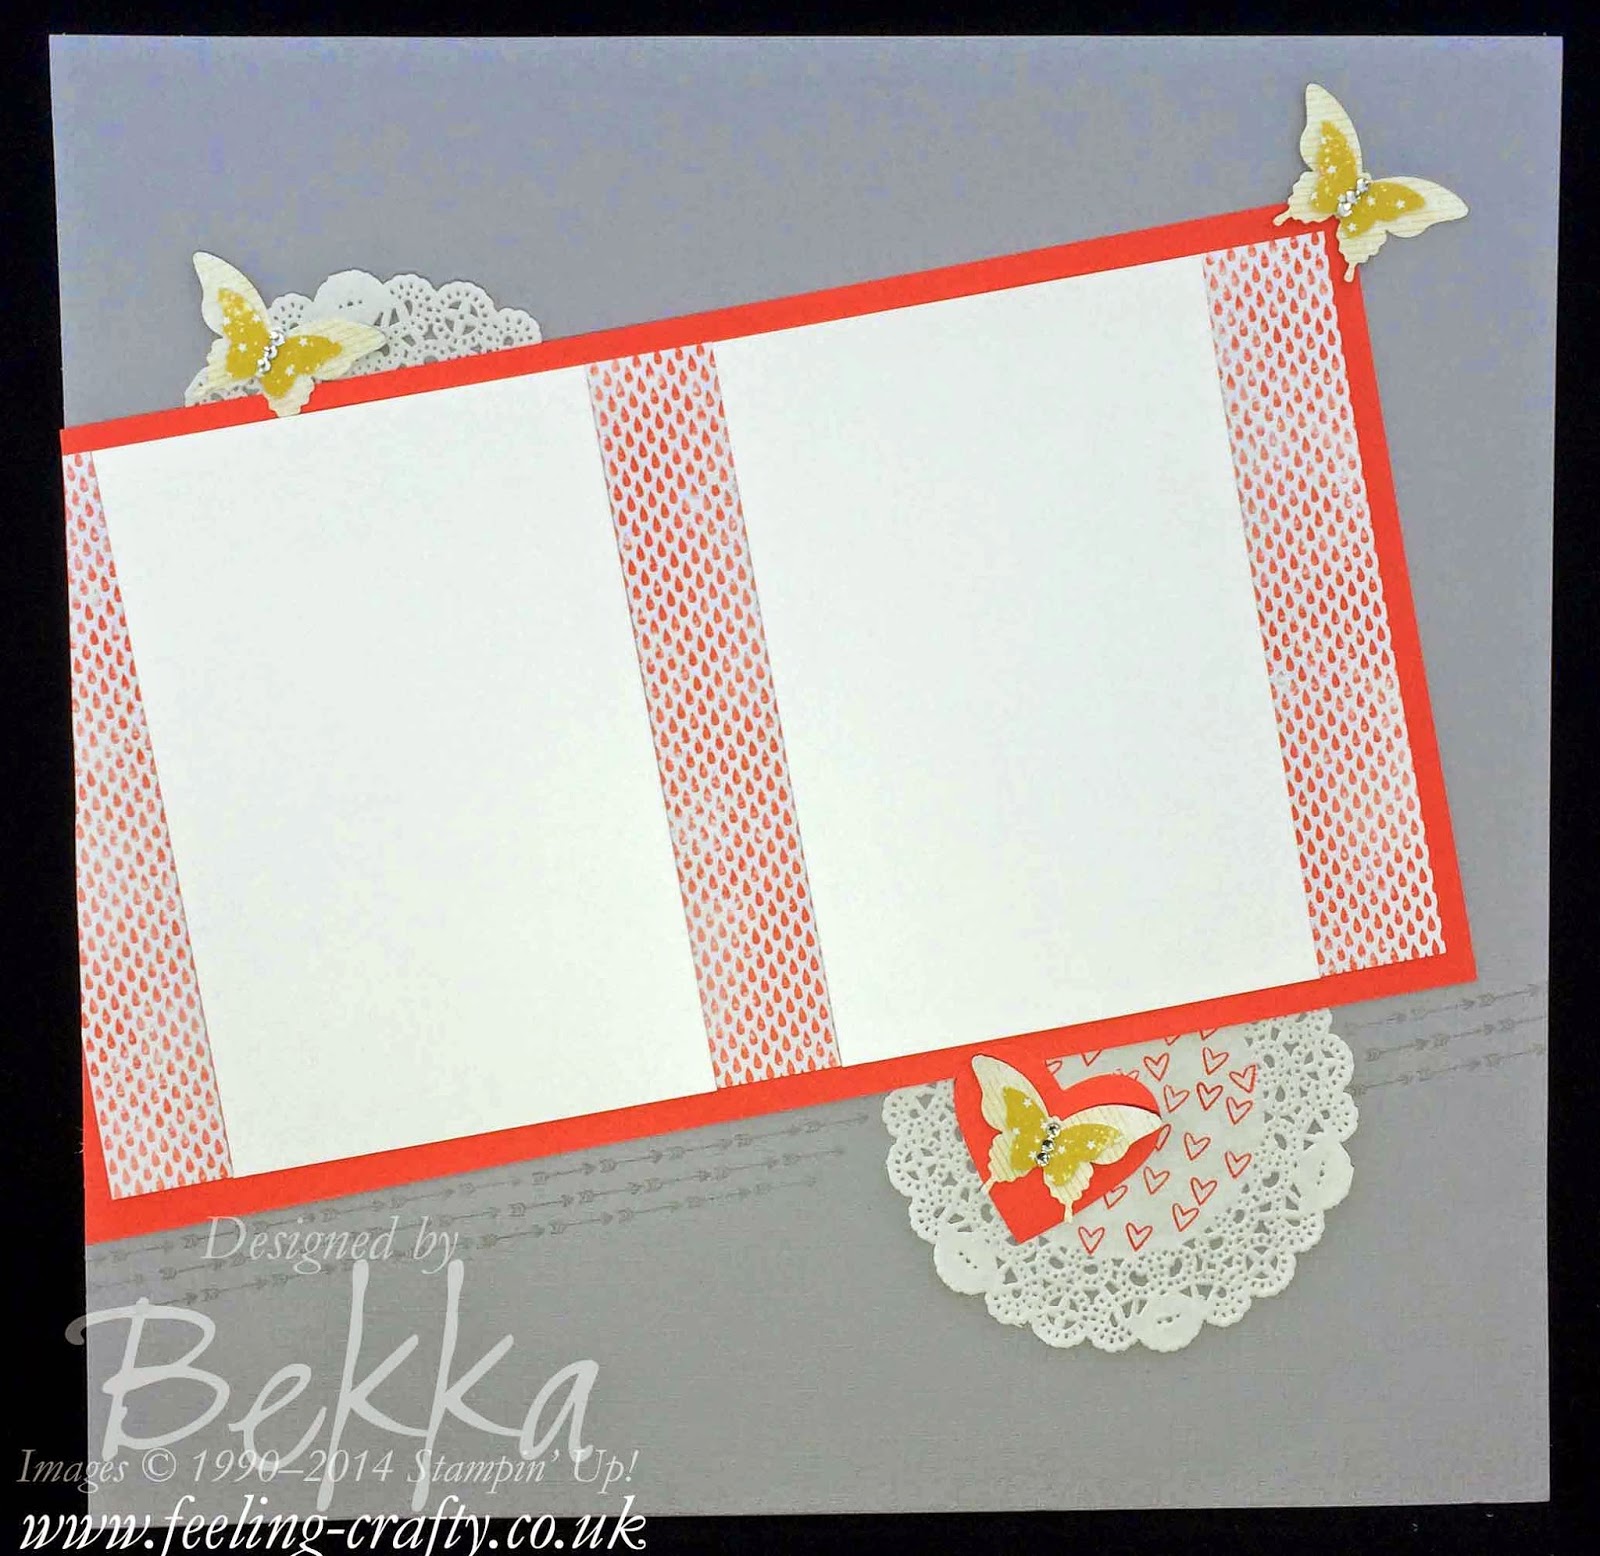 Scrapbook Page featuring the High Tides Papers from Stampin' Up - check this blog every Saturday for Scrapbooking Ideas